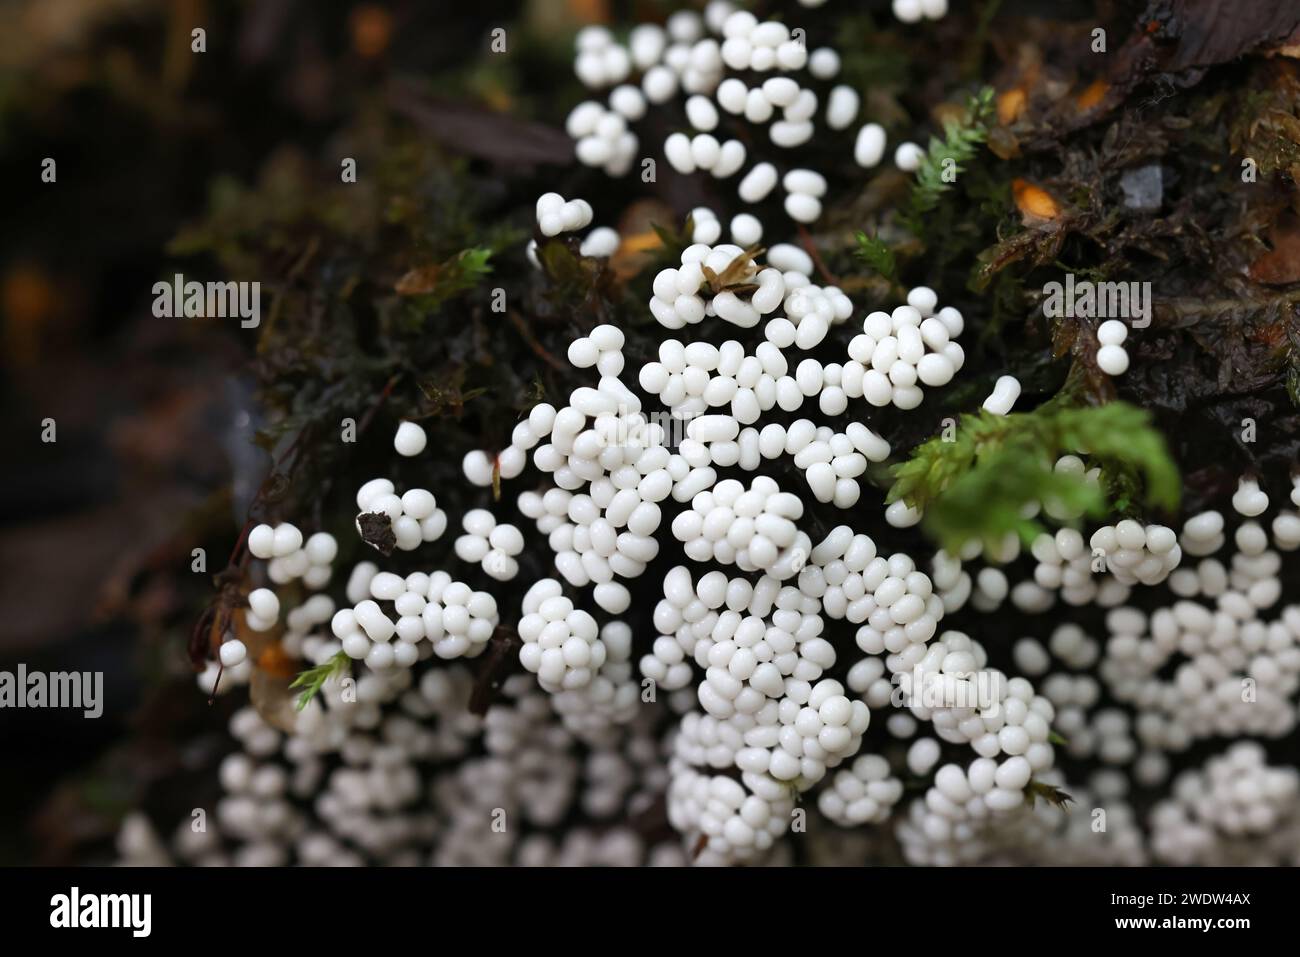 Trichia varia, a slime mold from Finland, no common English name Stock Photo